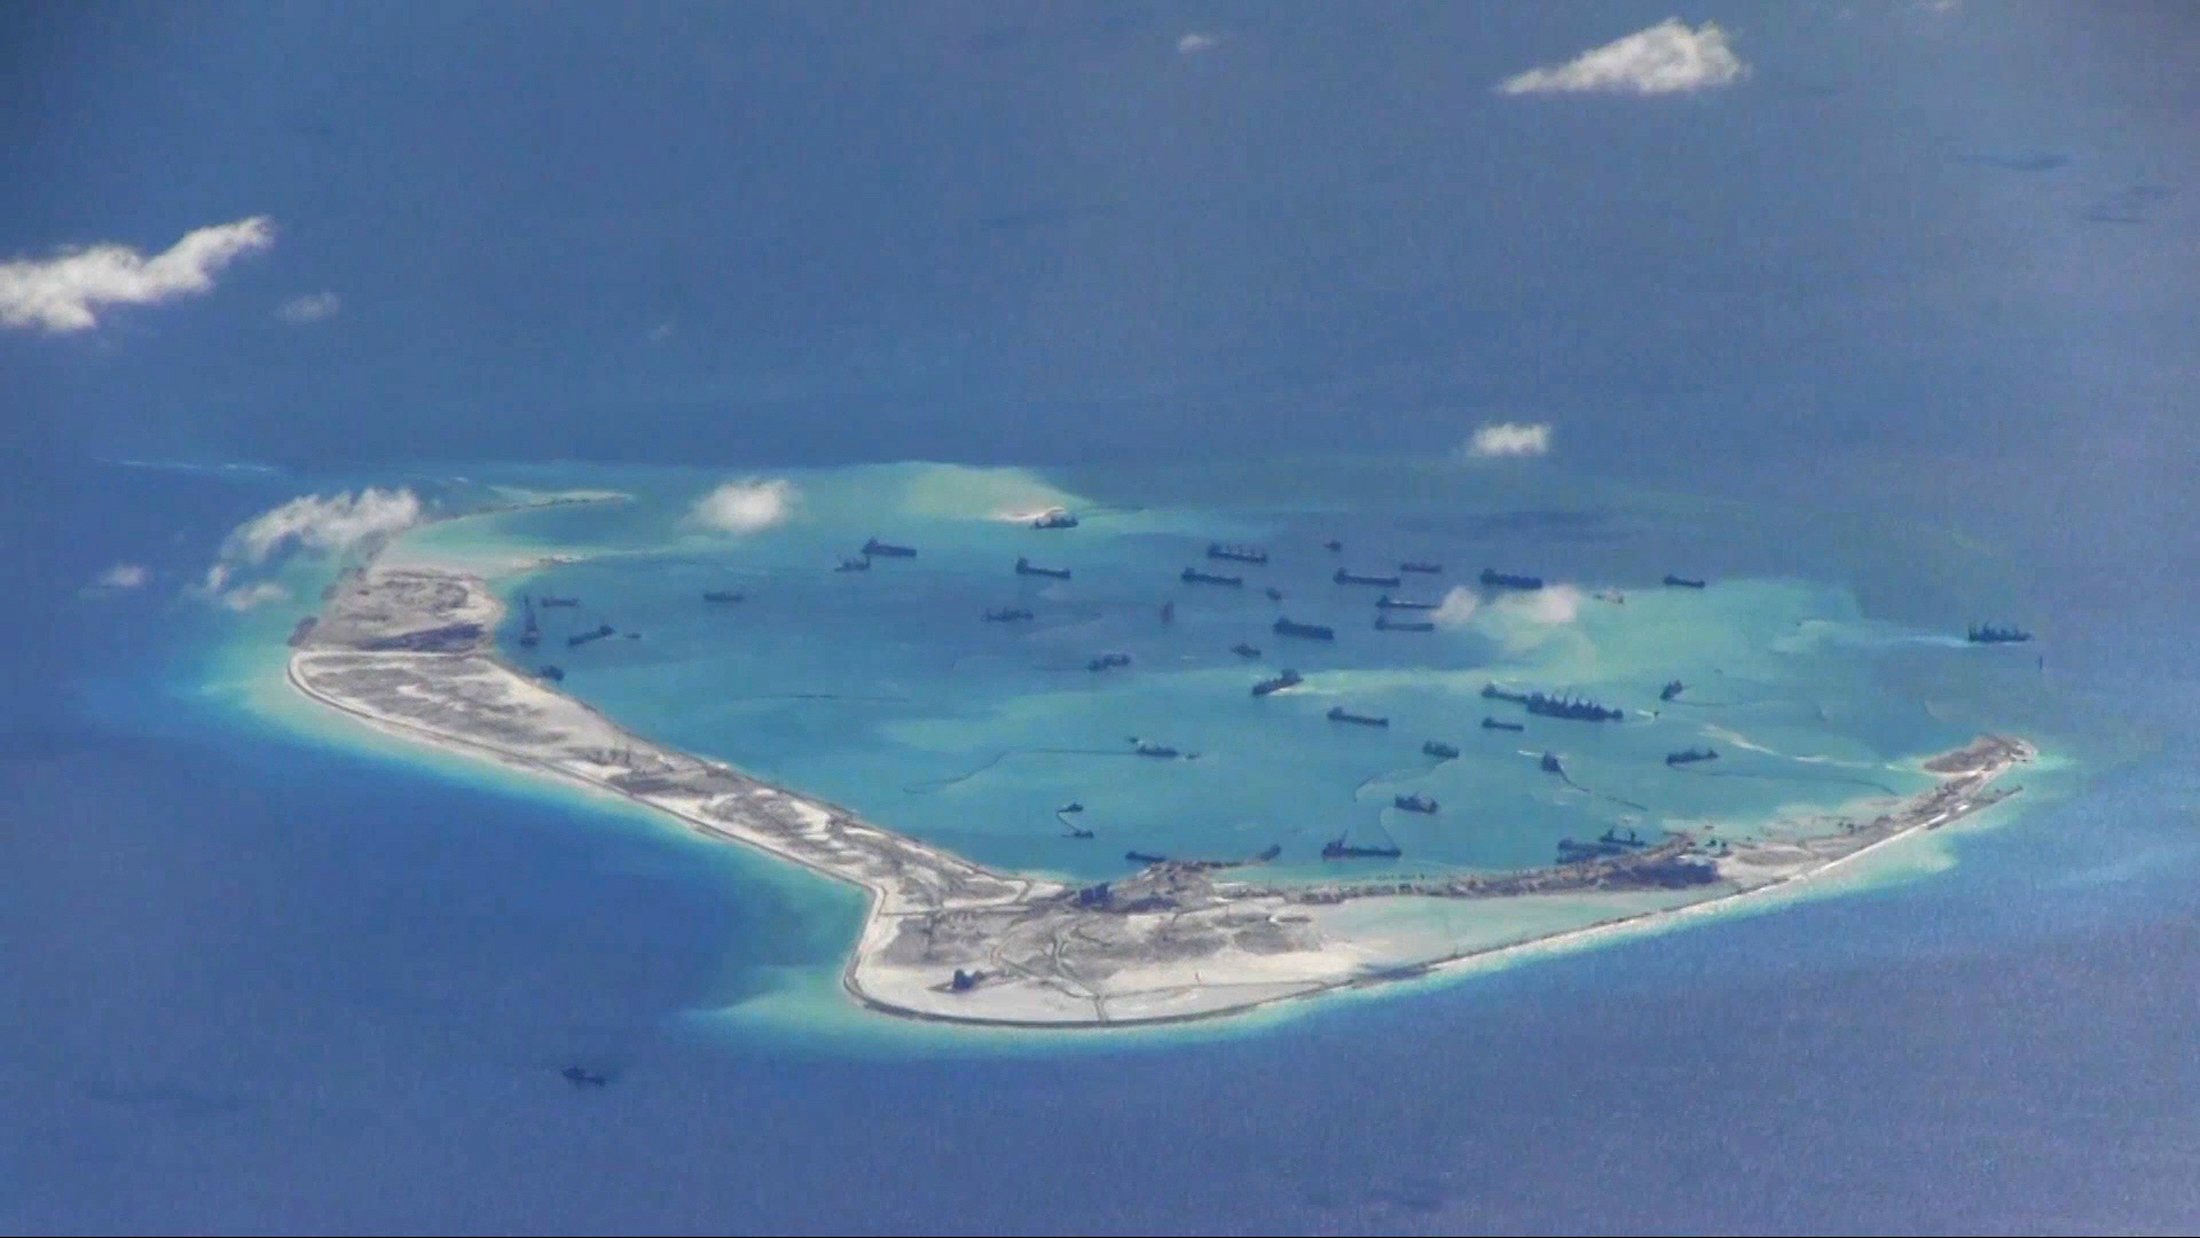 China backs the construction of military facilities on disputed islands